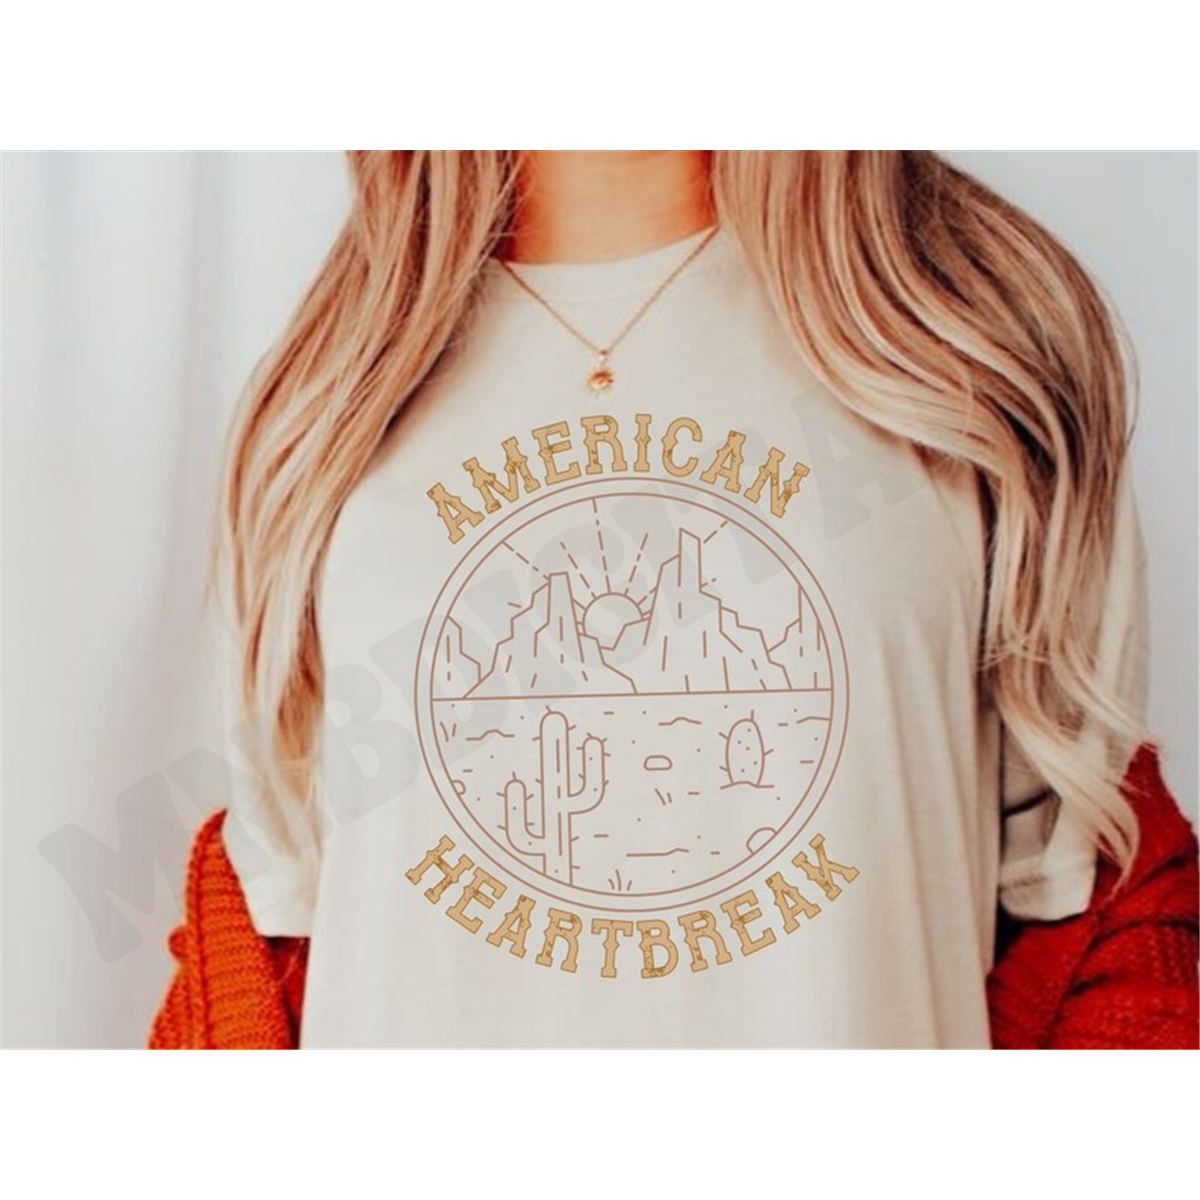 american-heartbreak-png-zach-bryan-tee-sublimation-png-image-1